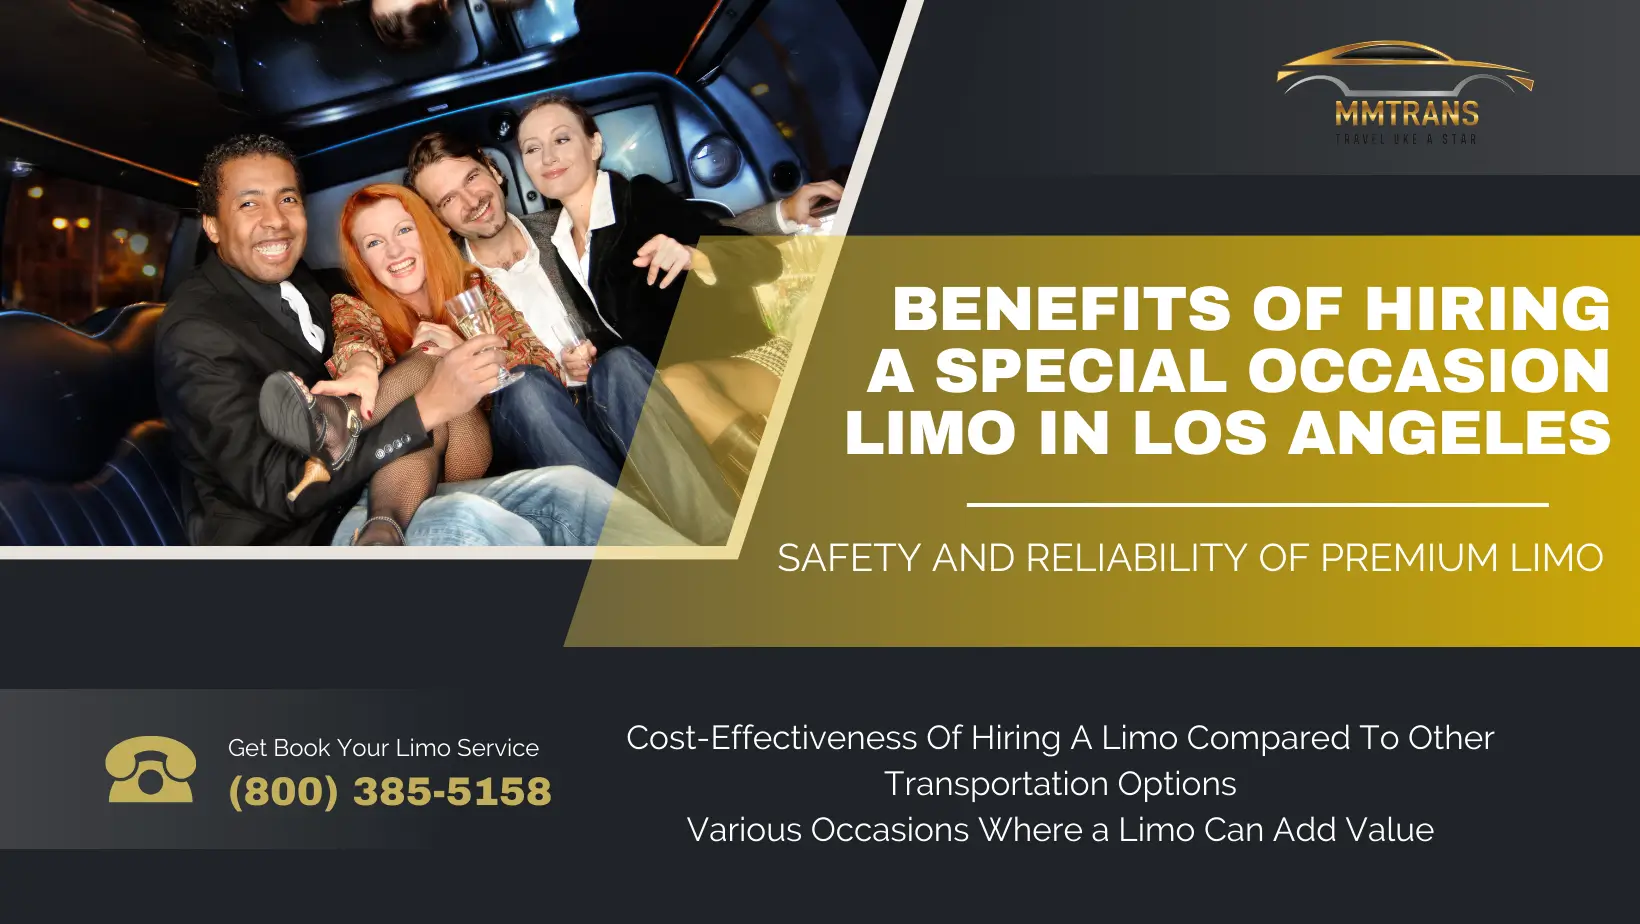 Benefits Of Hiring A Special Occasion Limo In Los Angeles